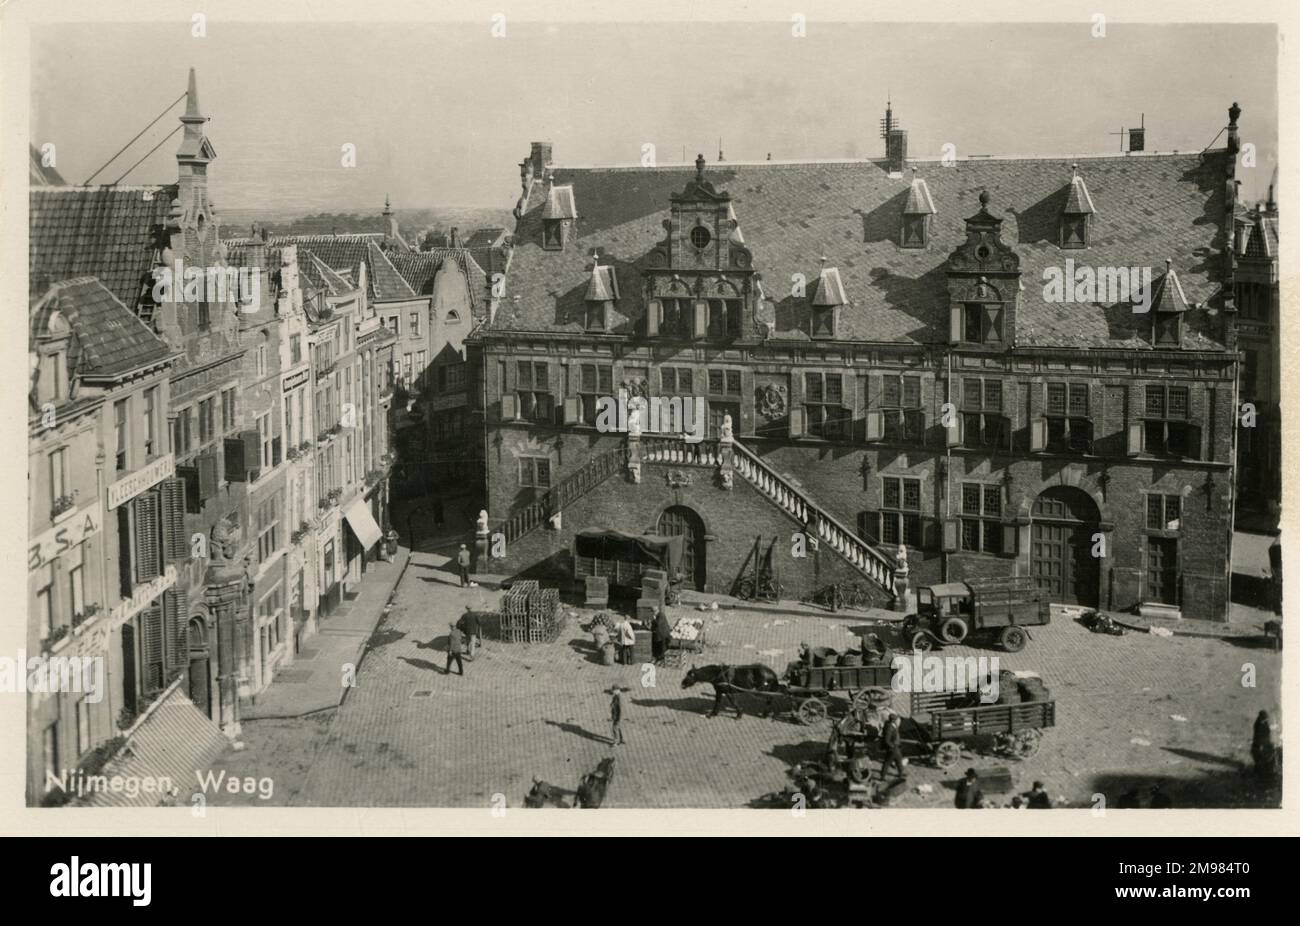 The Waag building, Grote Markt, Nijmegen The Netherlands, has been used as a meat market, the image shows horse drawn waggons in the square. Stock Photo